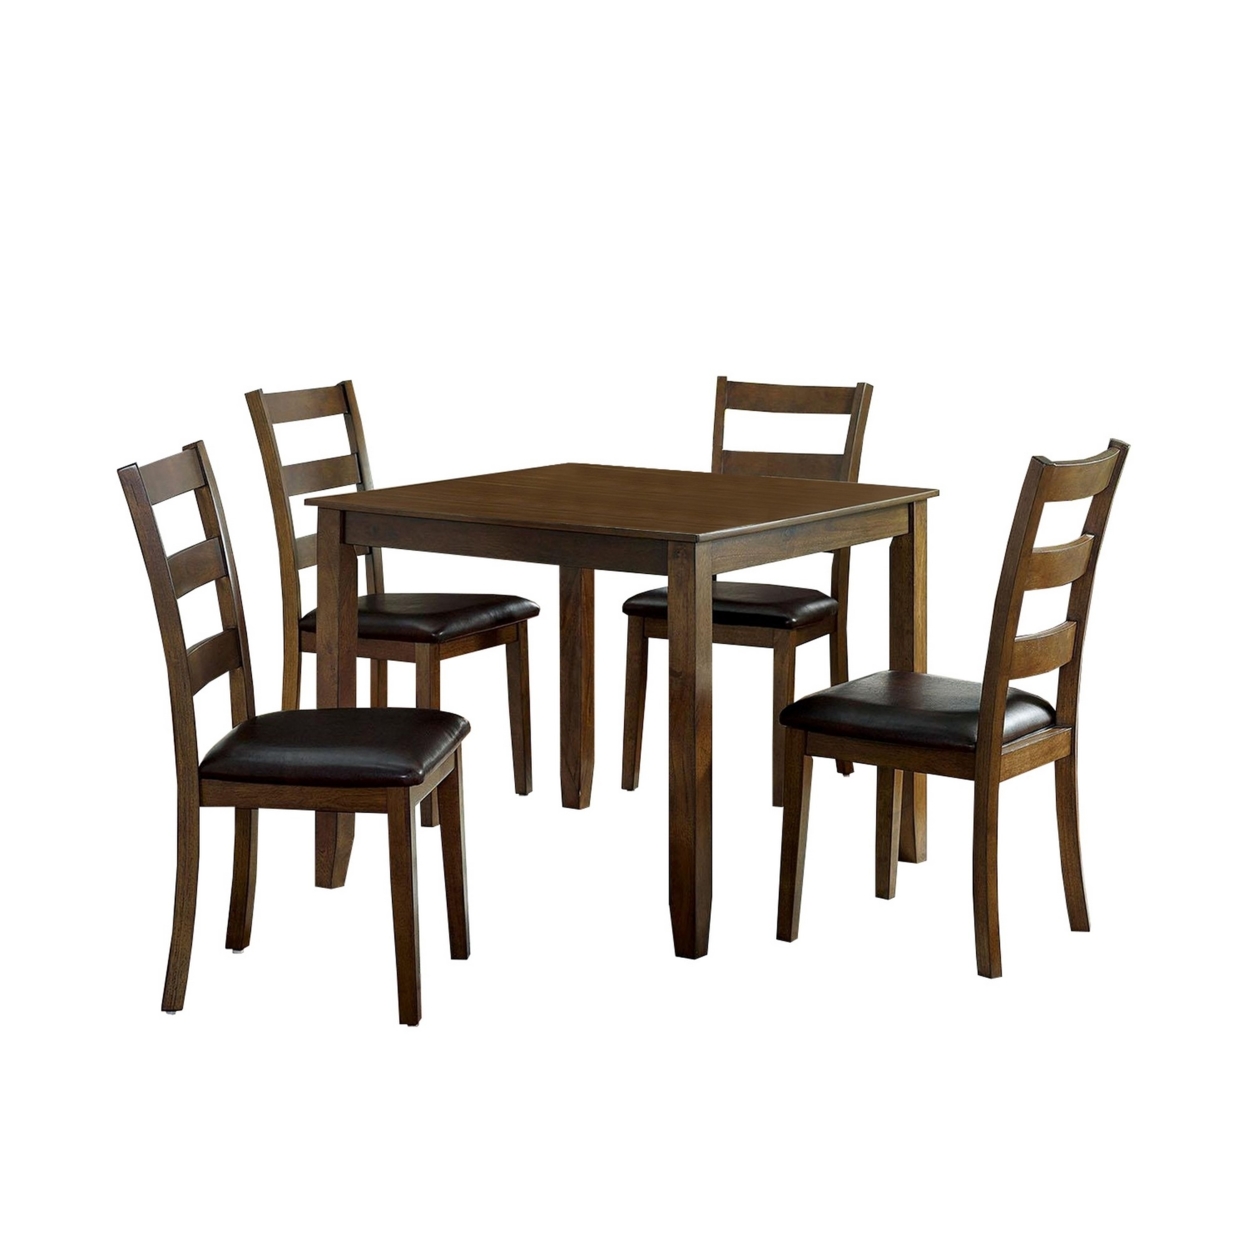 5 Piece Dining Table Set With Leatherette Seating, Brown- Saltoro Sherpi